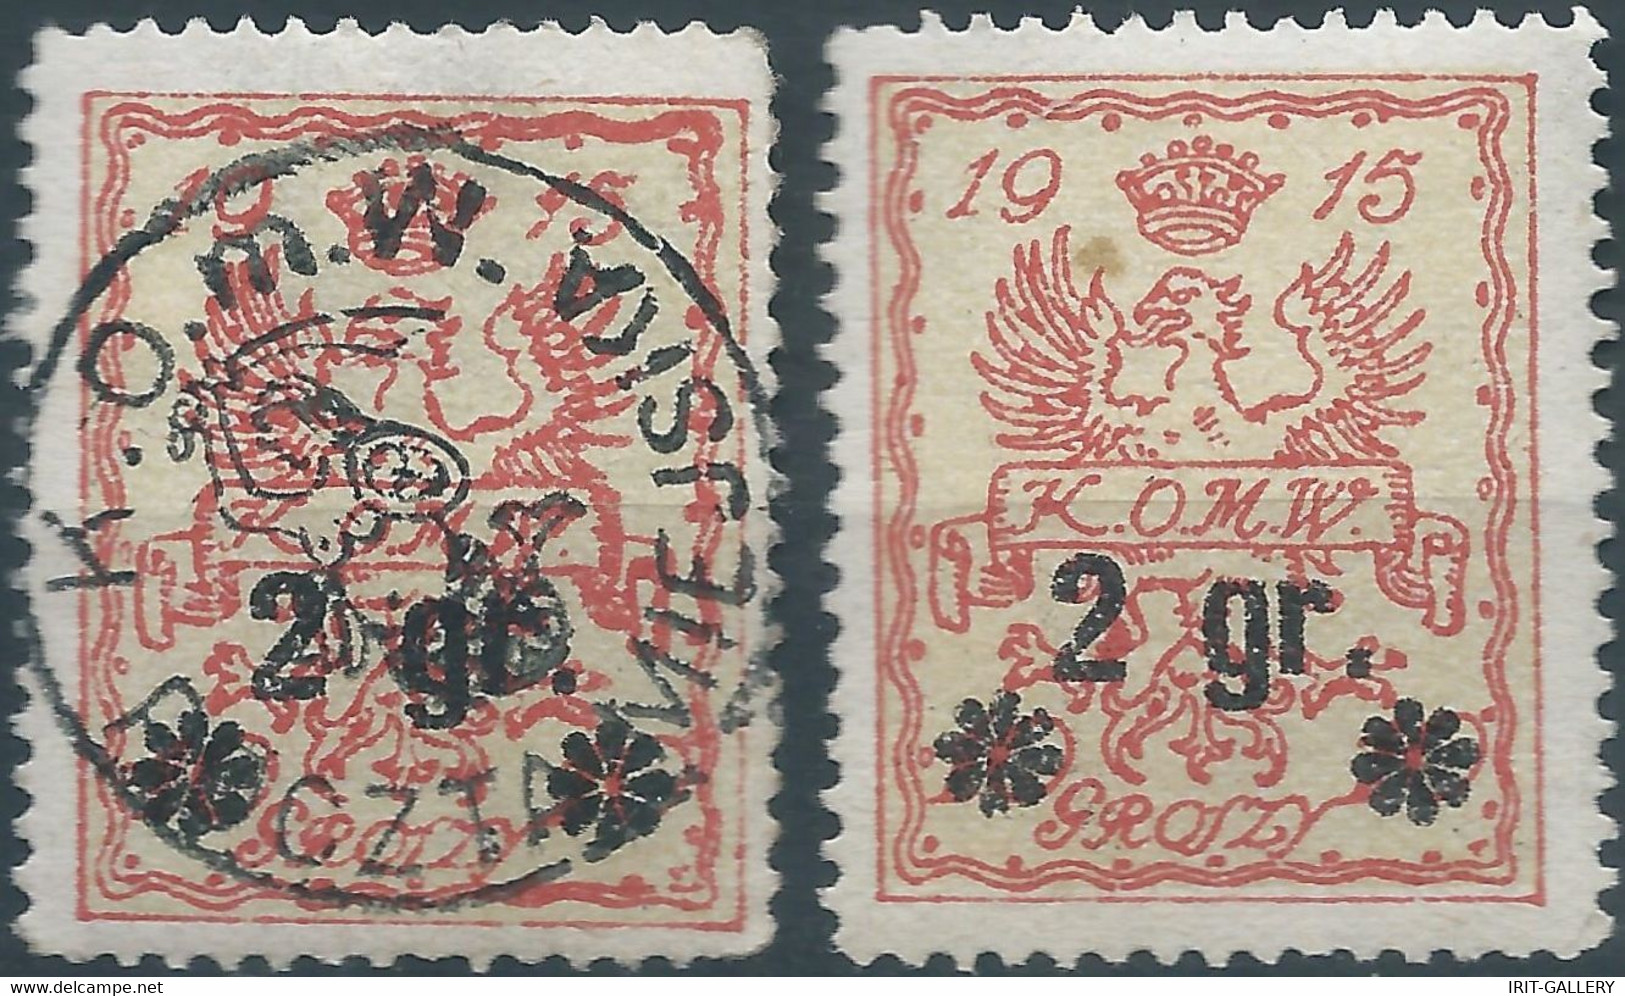 POLONIA-POLAND-POLSKA,1915 Warsaw Local Issues,10 GROSZY/ 2 GR,Obliterated And Mint - Unused Stamps